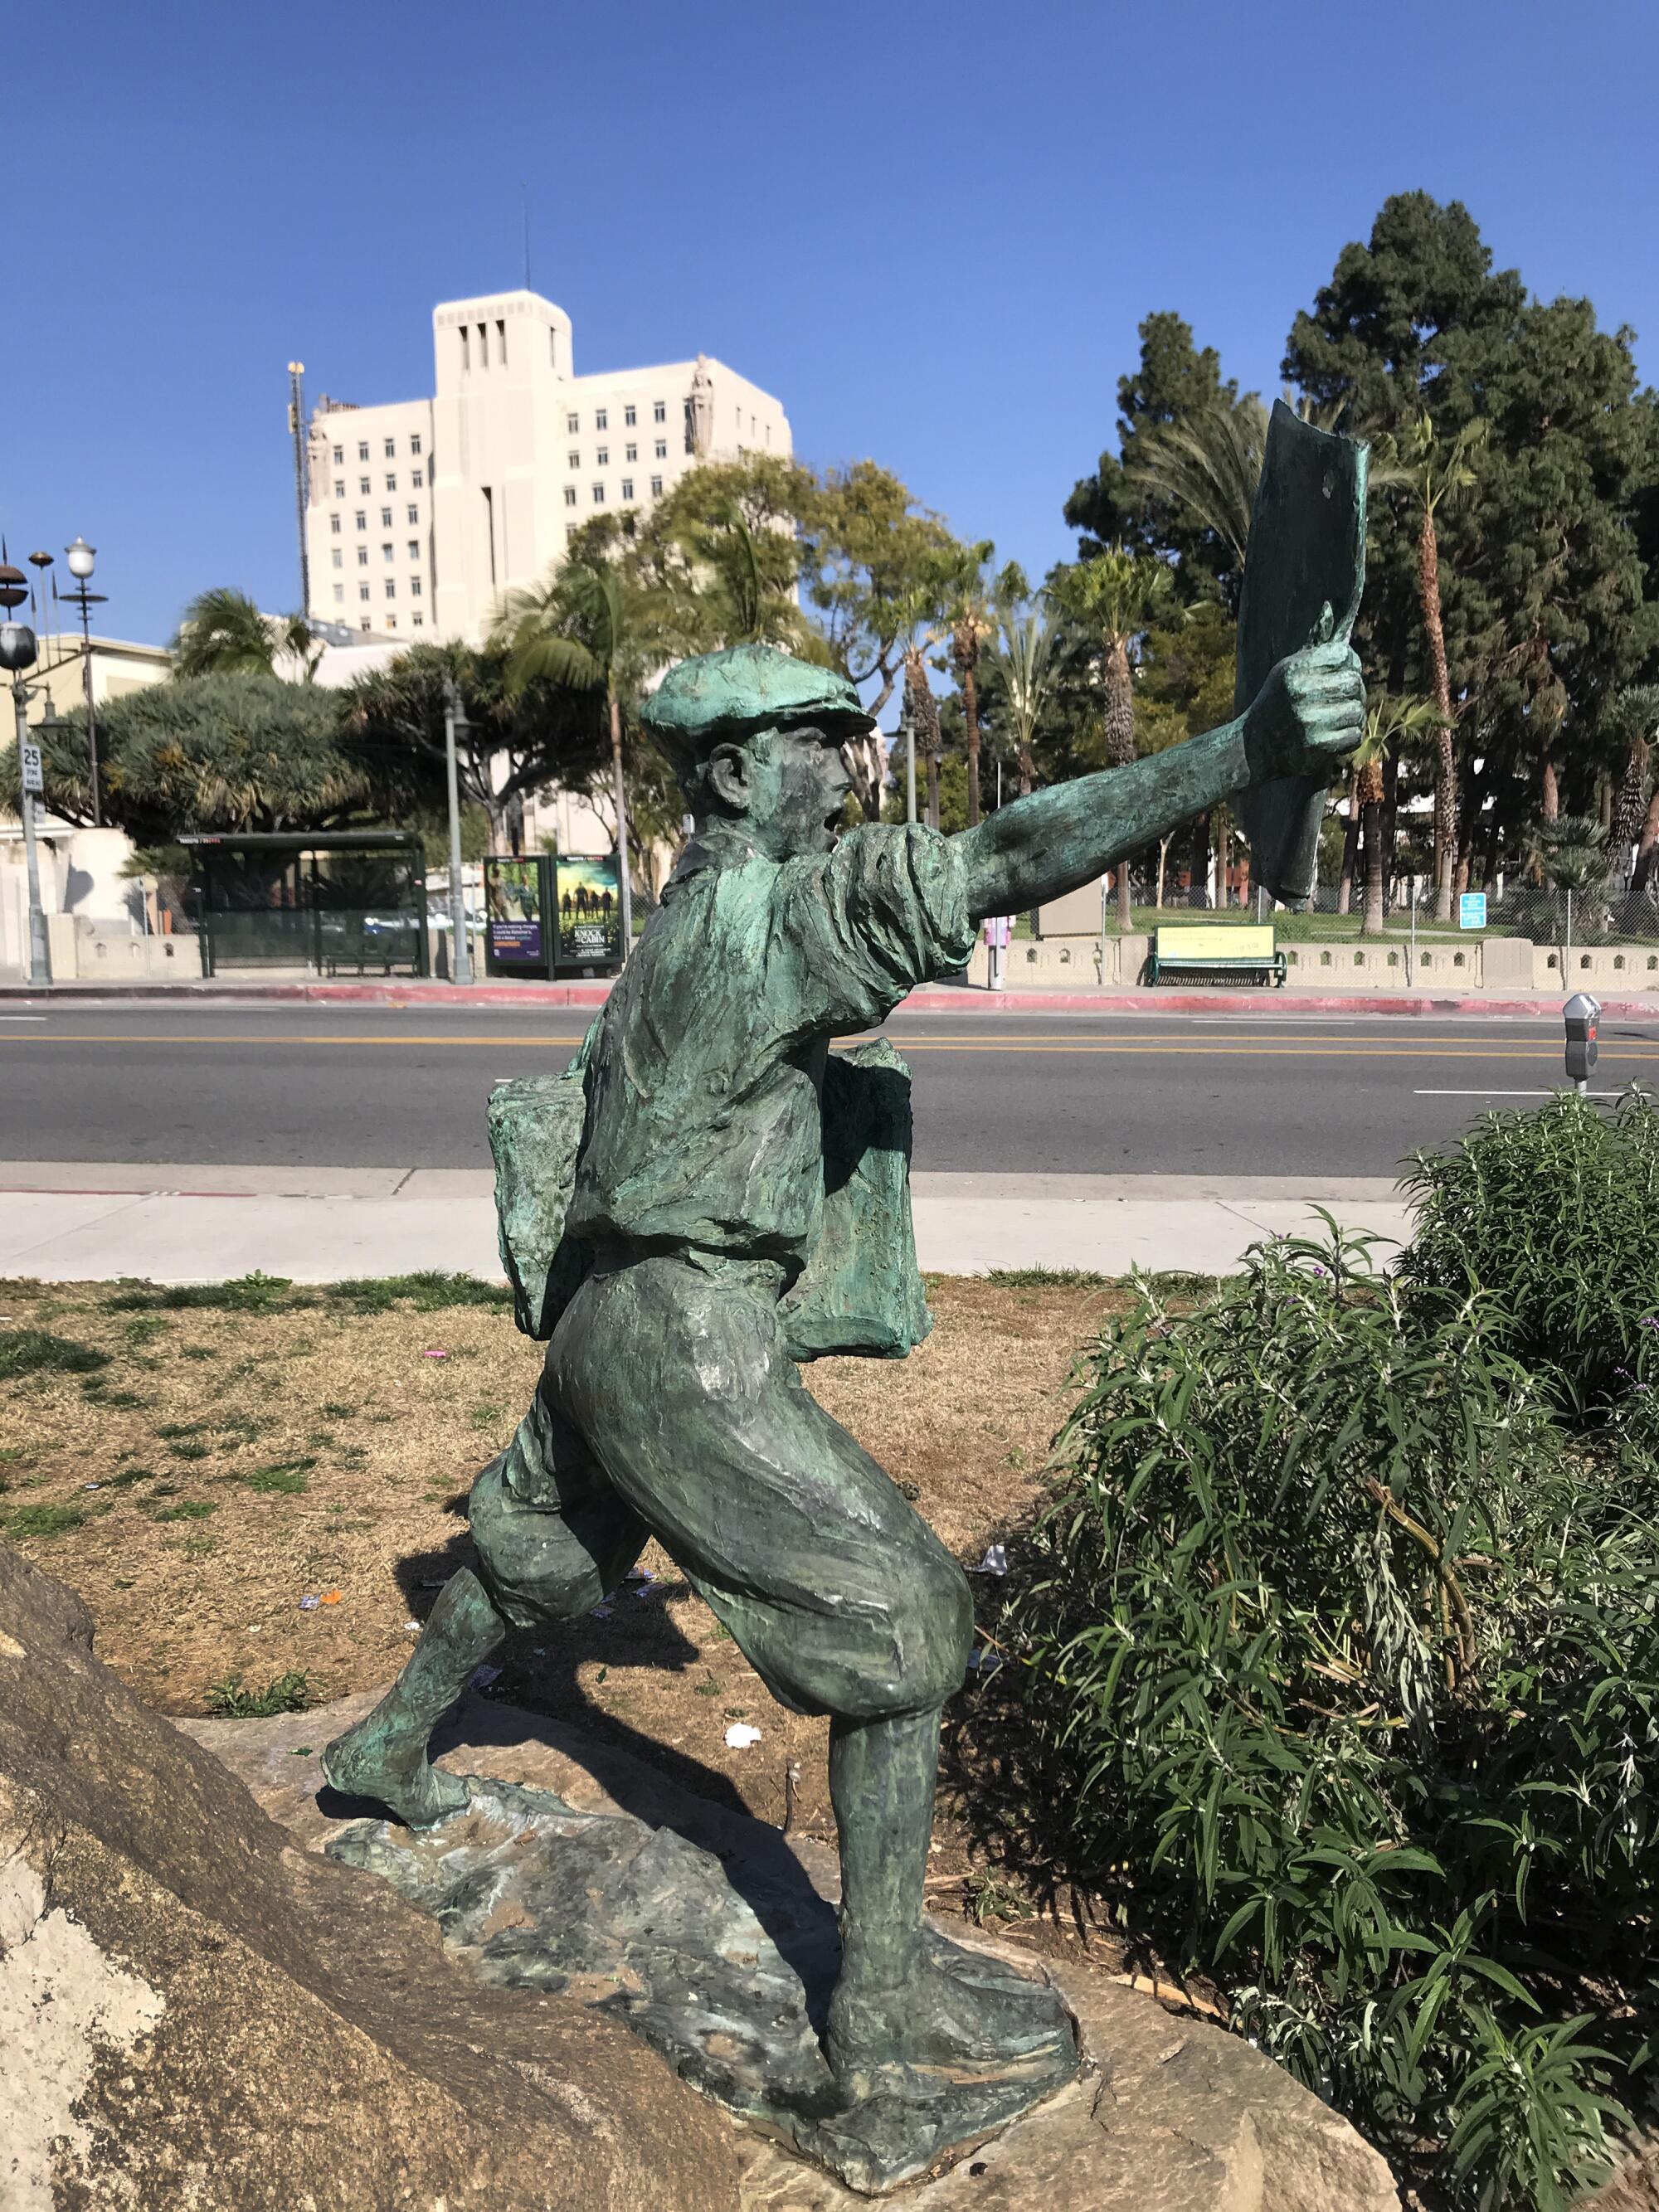 The statue of the Newspaper boy, which stands next to 